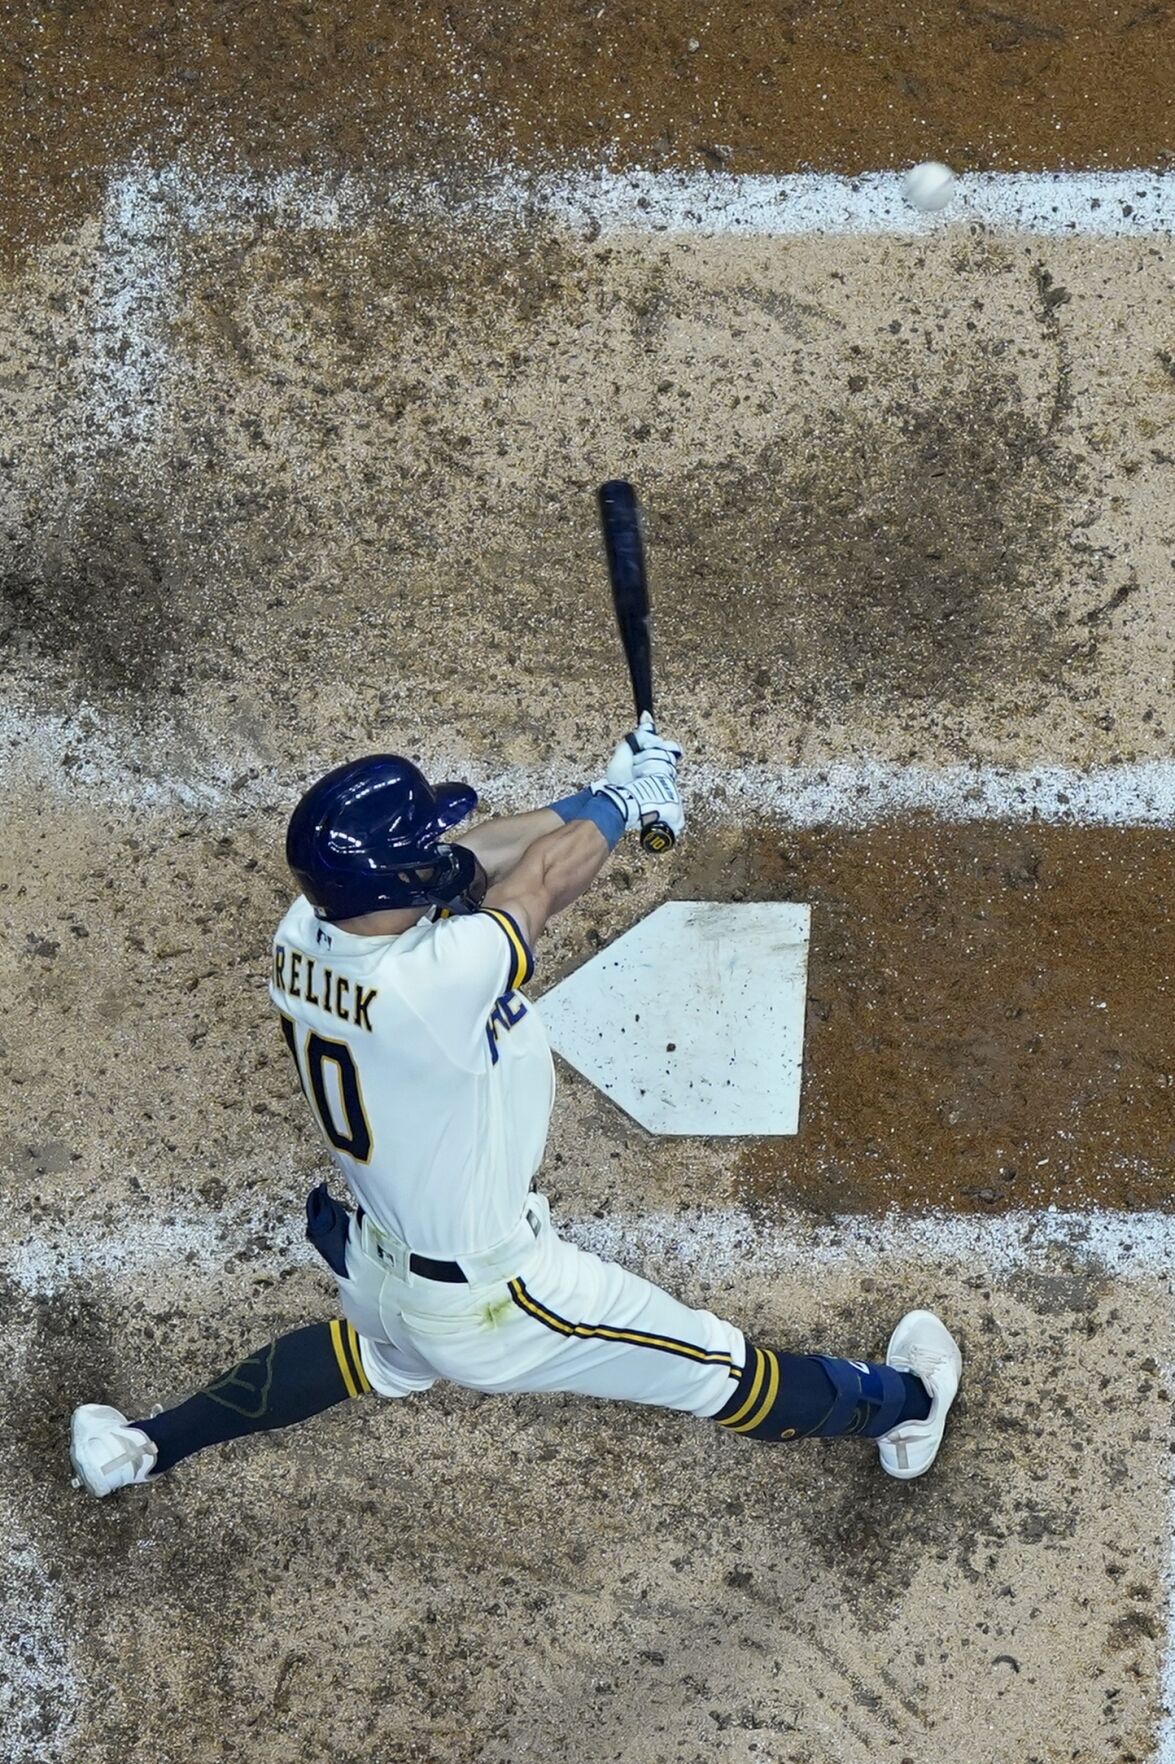 Brewers: Crew swept at home by the league's worst team